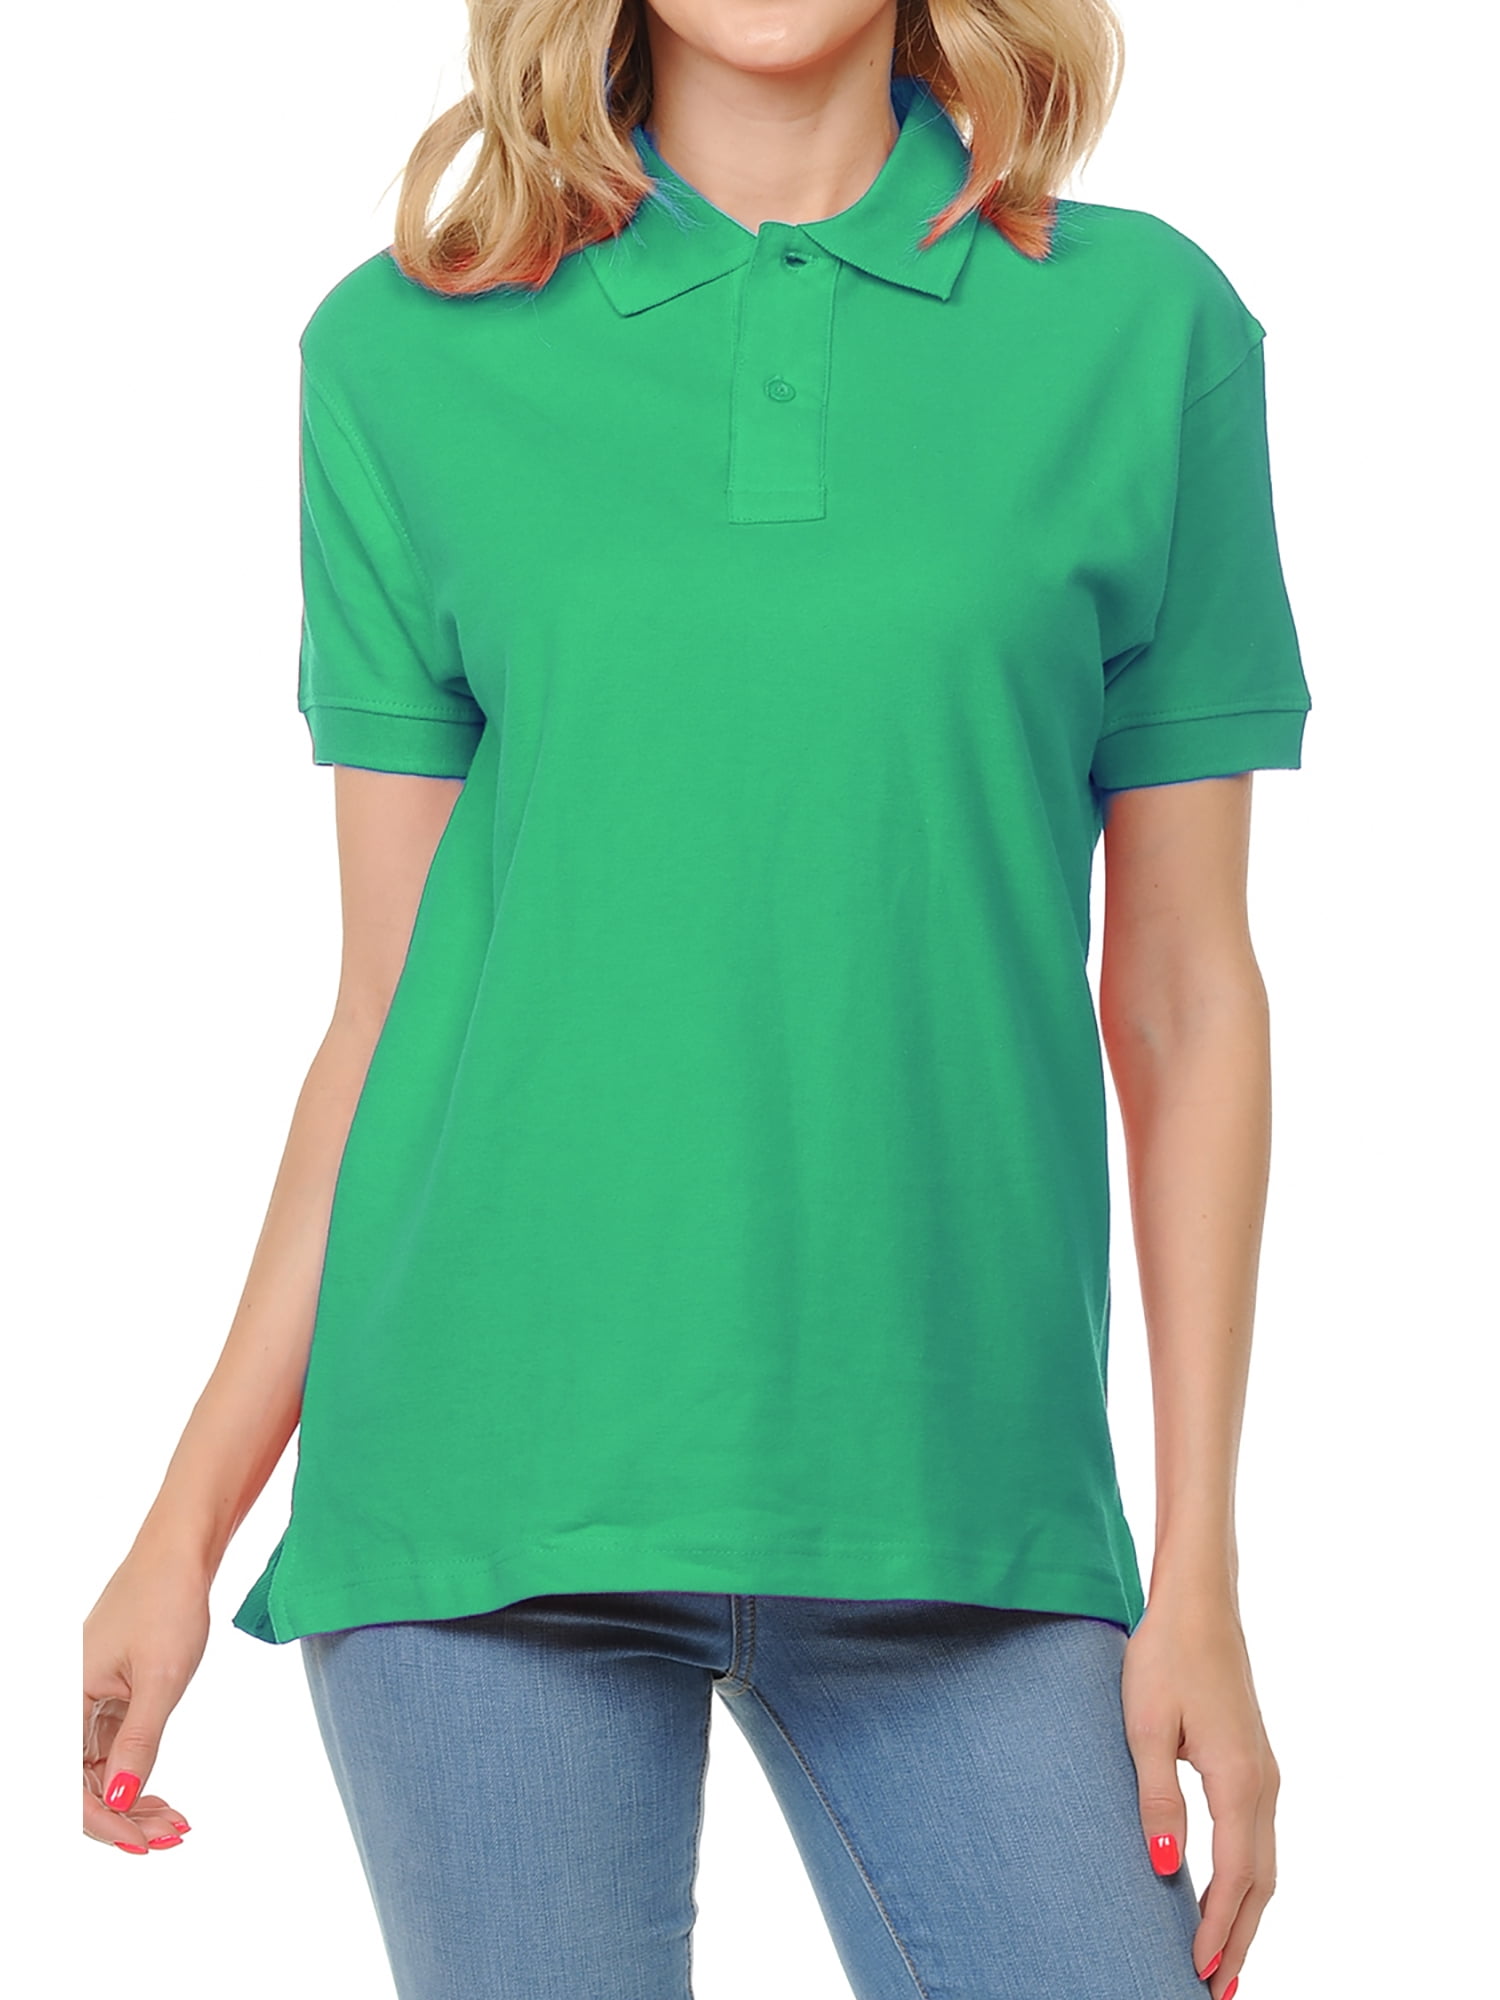 Basico (Kelly Green) Polo Collared Shirts For Women 100% Cotton Short ...